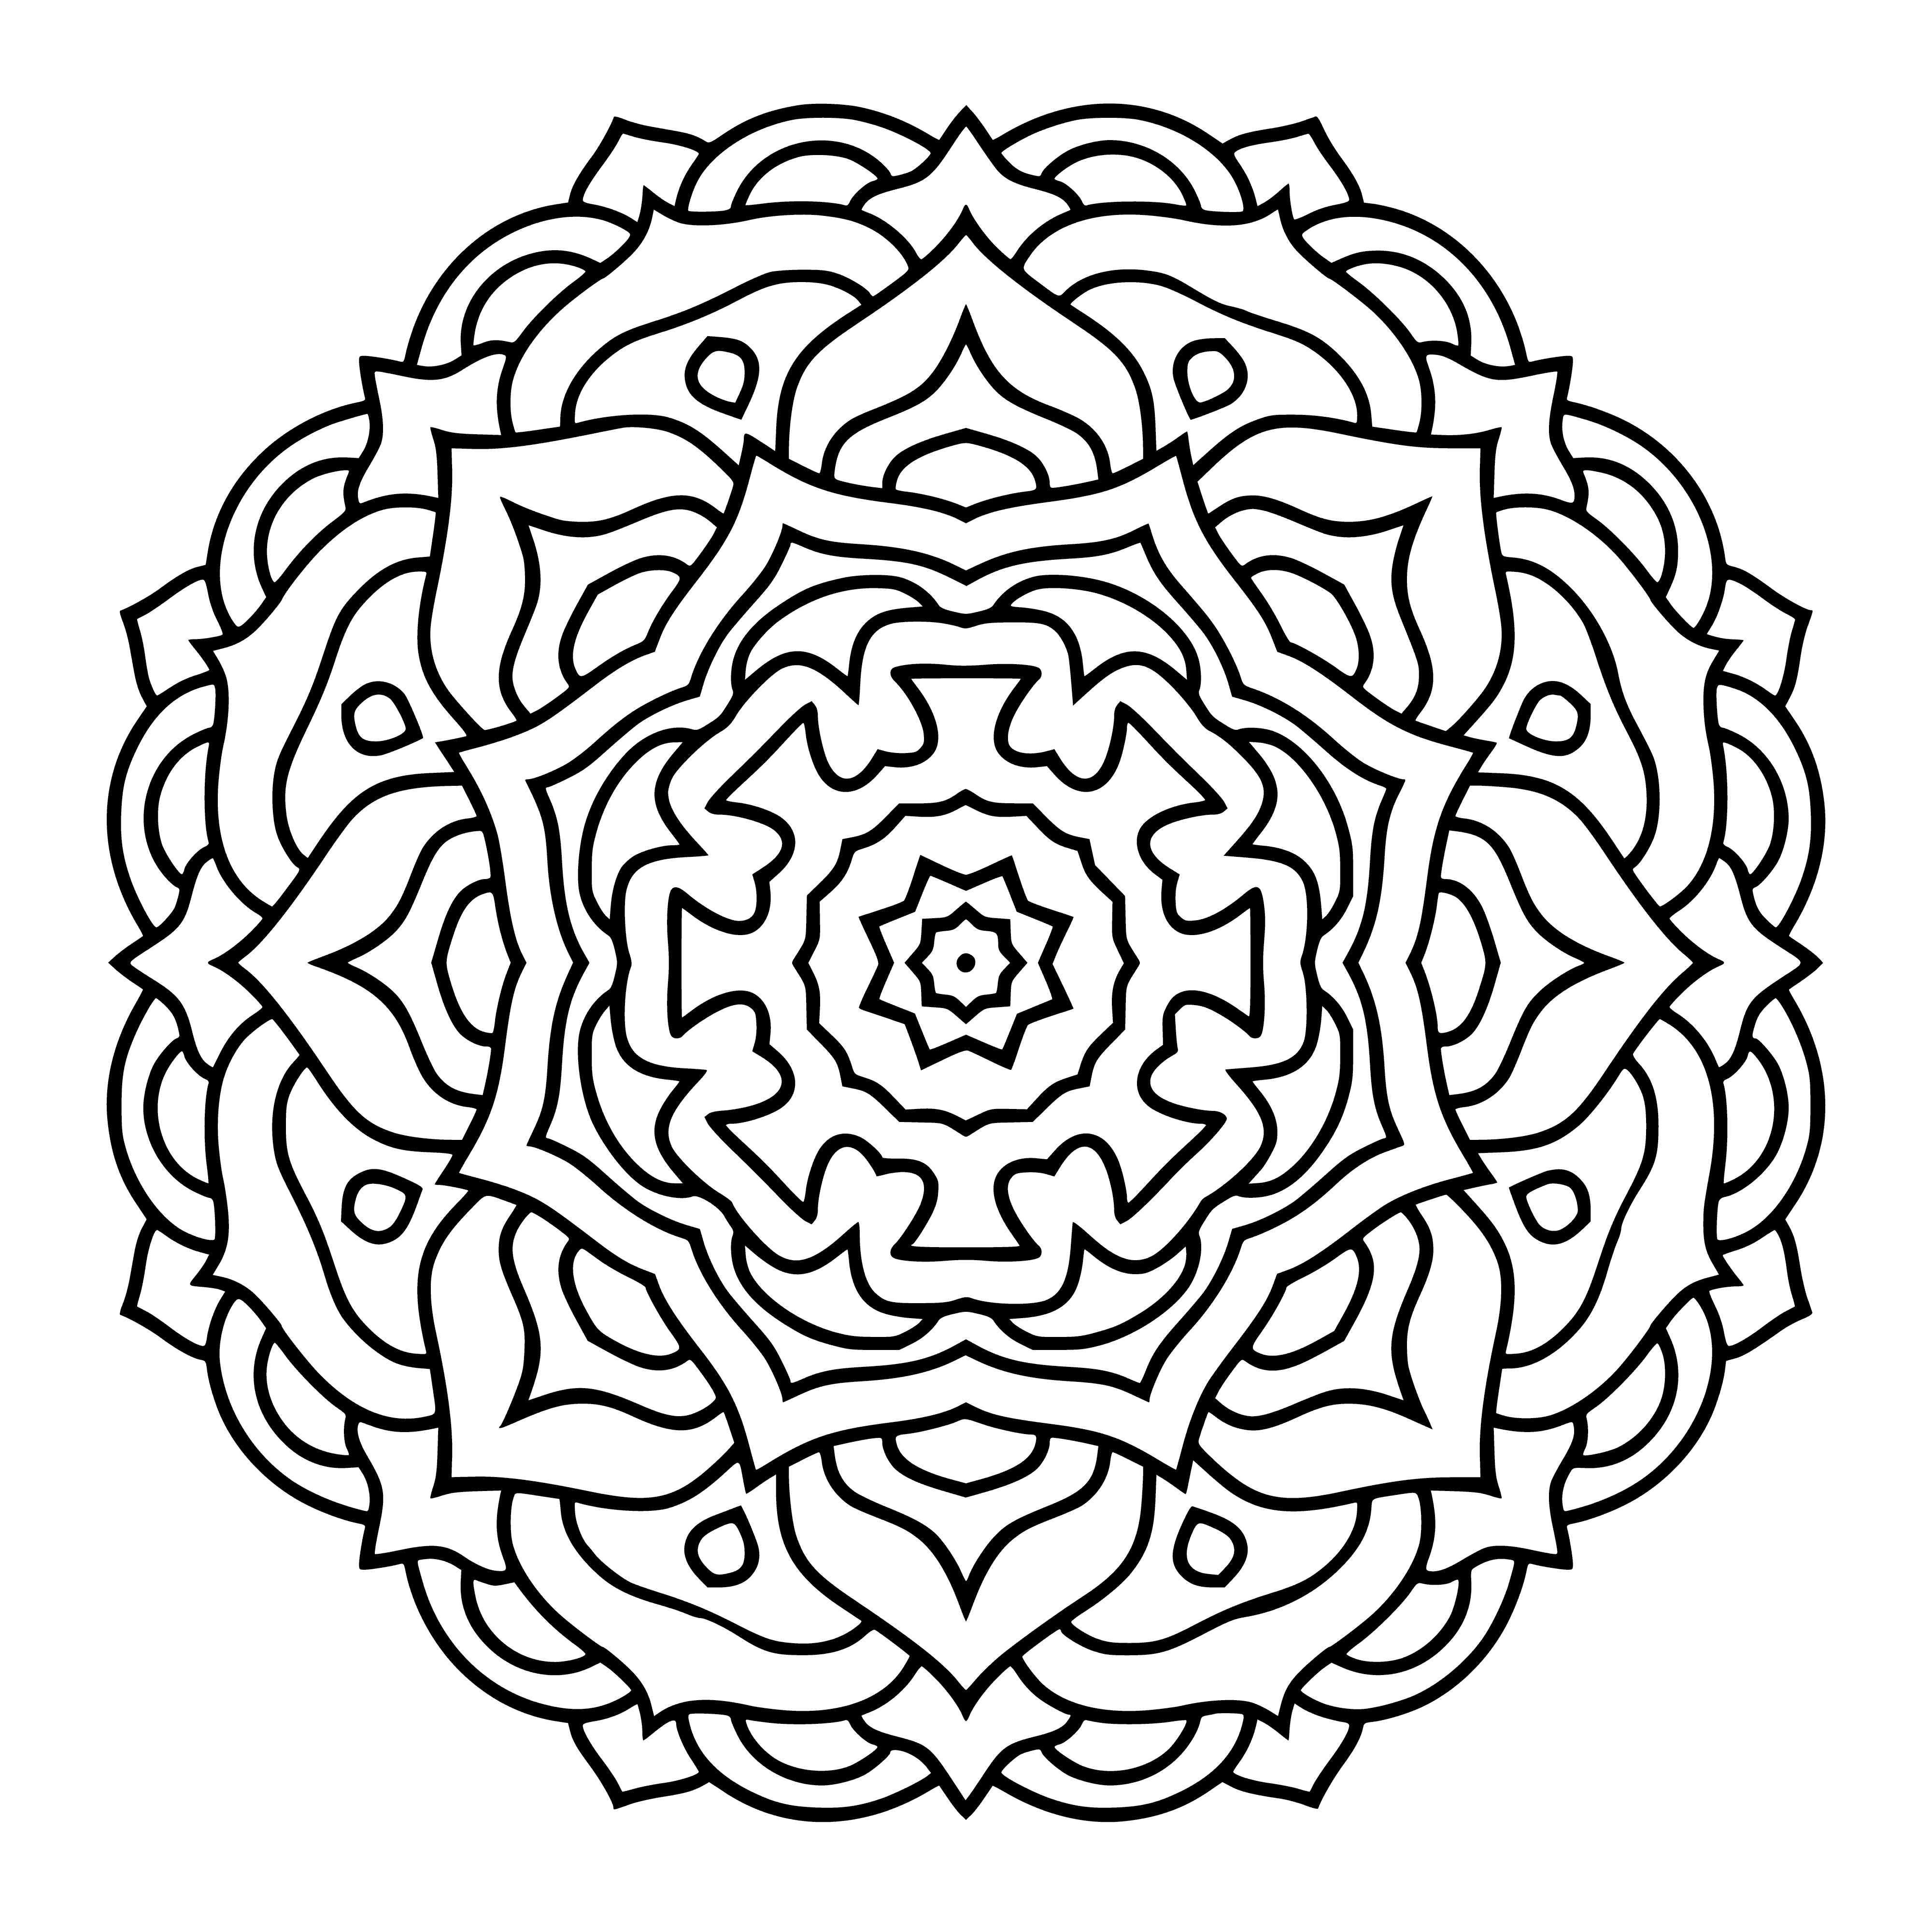 coloring page: Large intricately-designed mandala w/ various colored shapes & patterns in center & each corner. #art #design